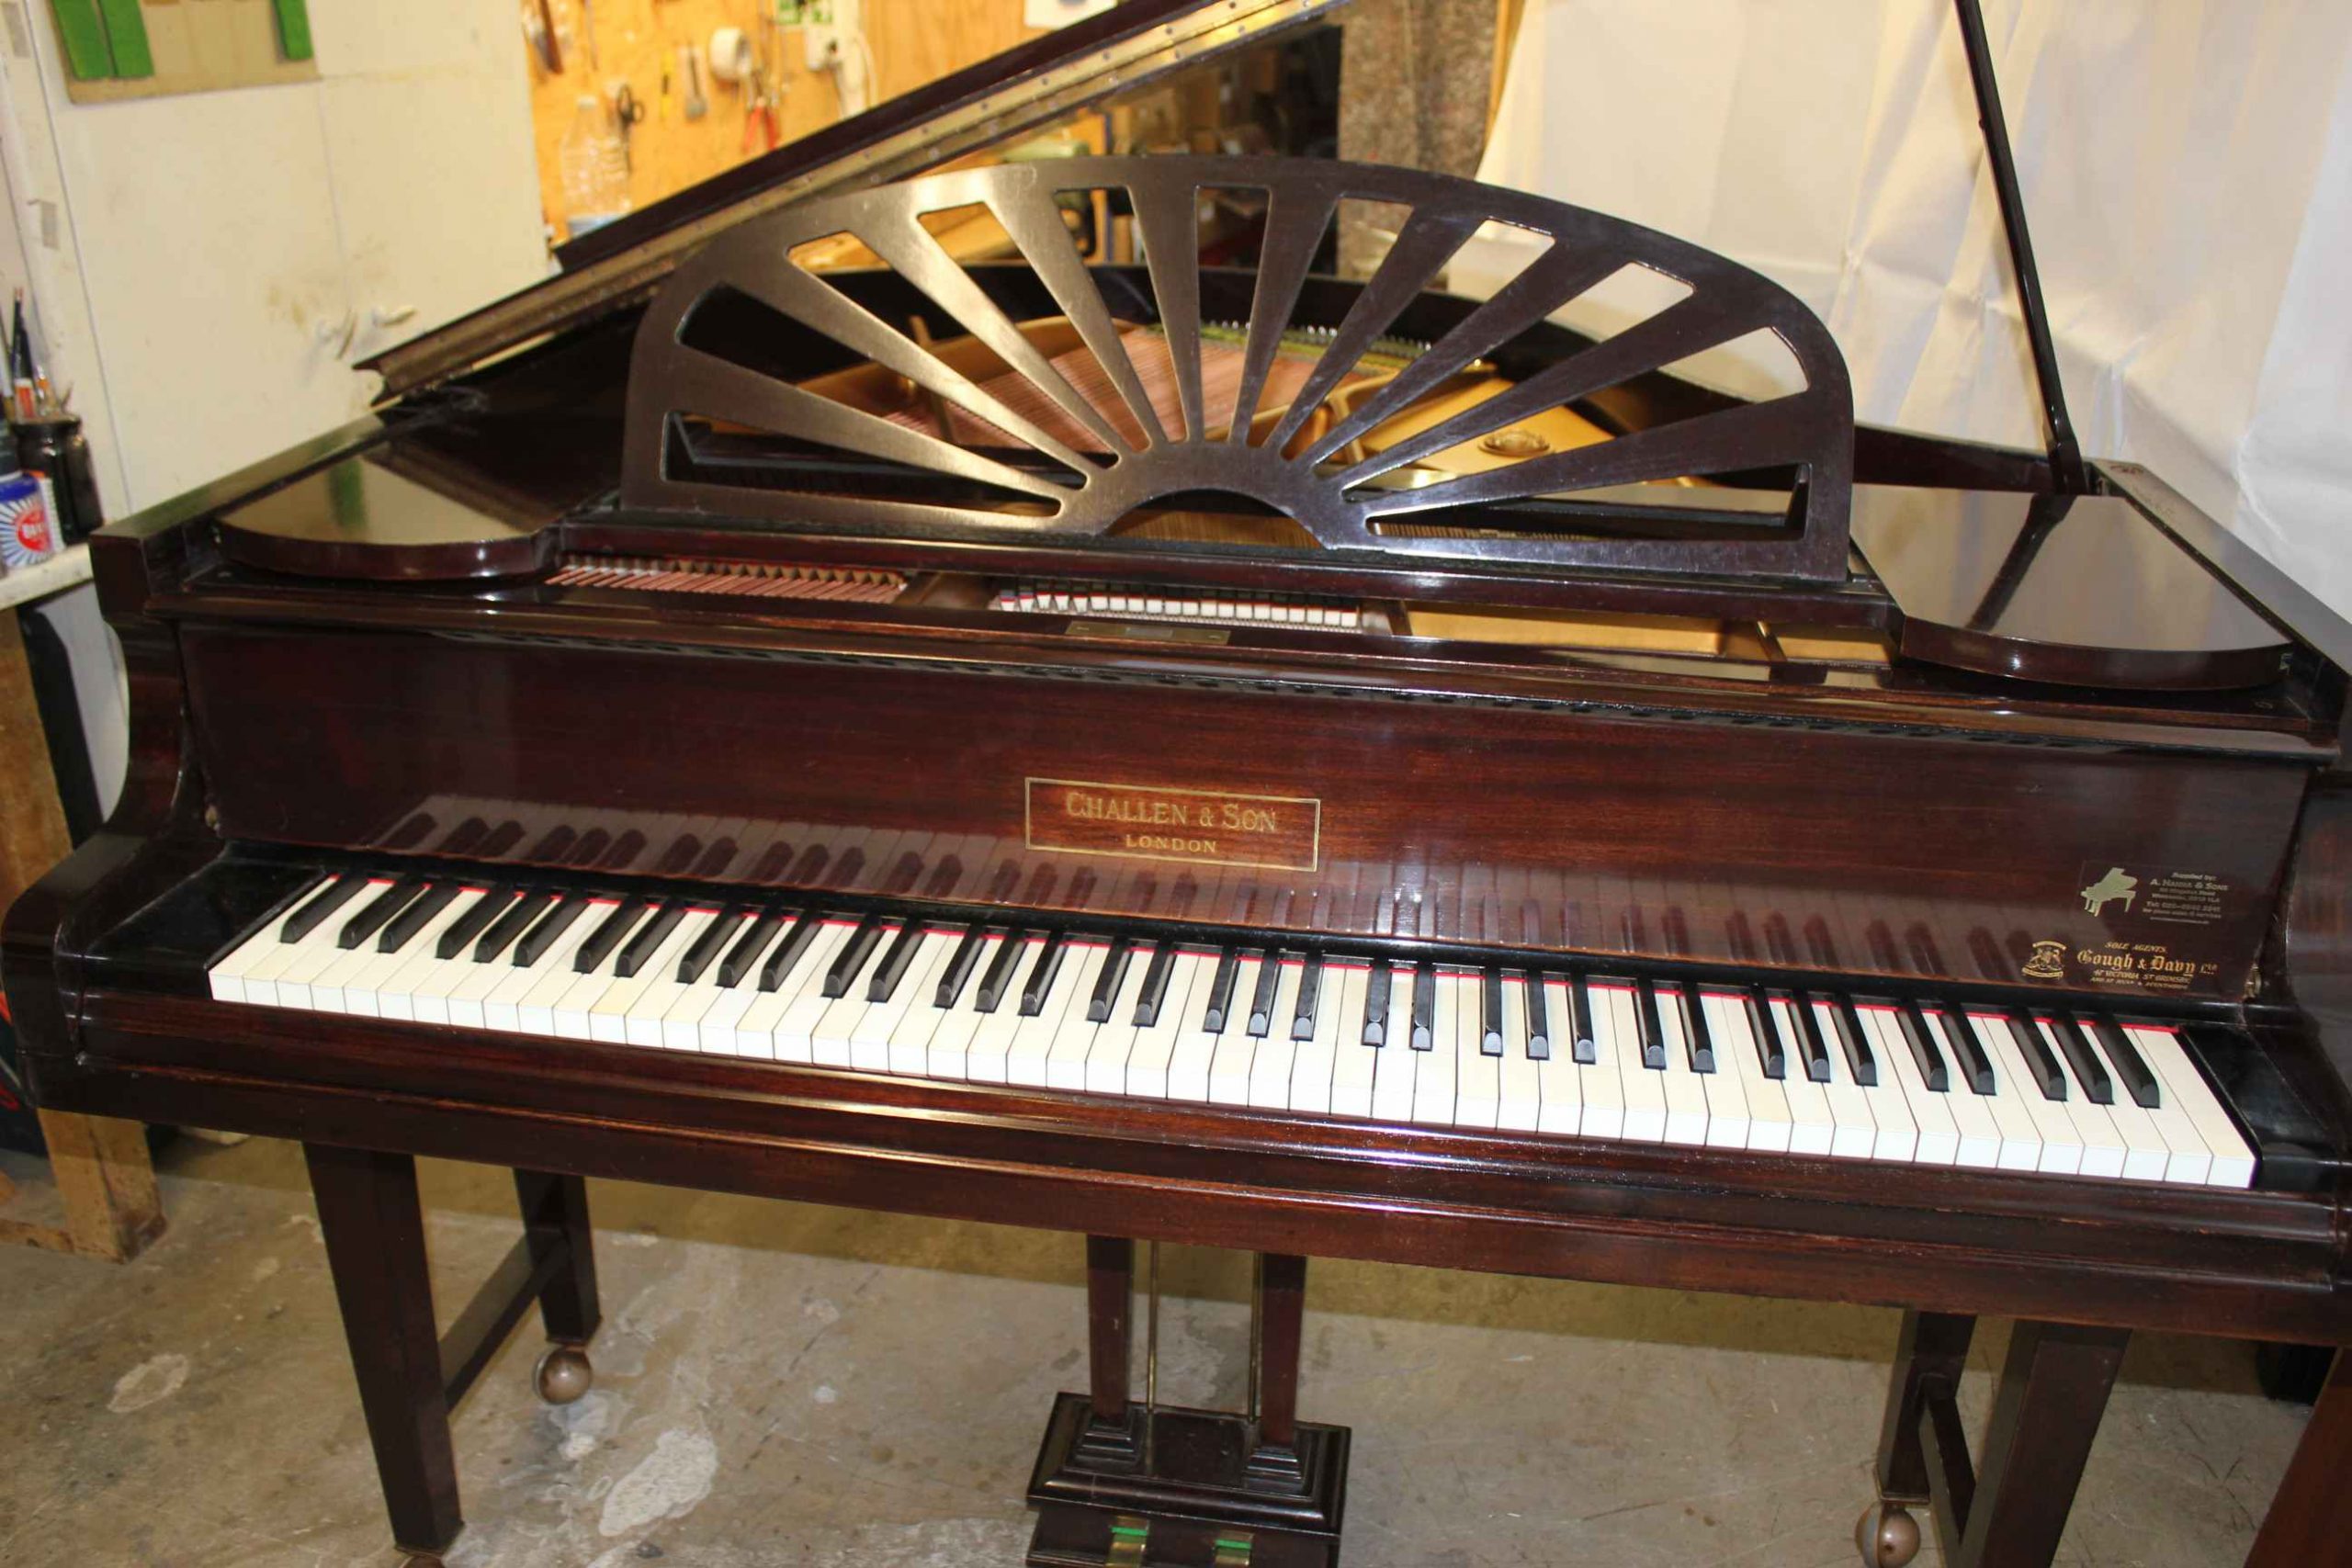 Challen antique baby grand piano front view music desk up